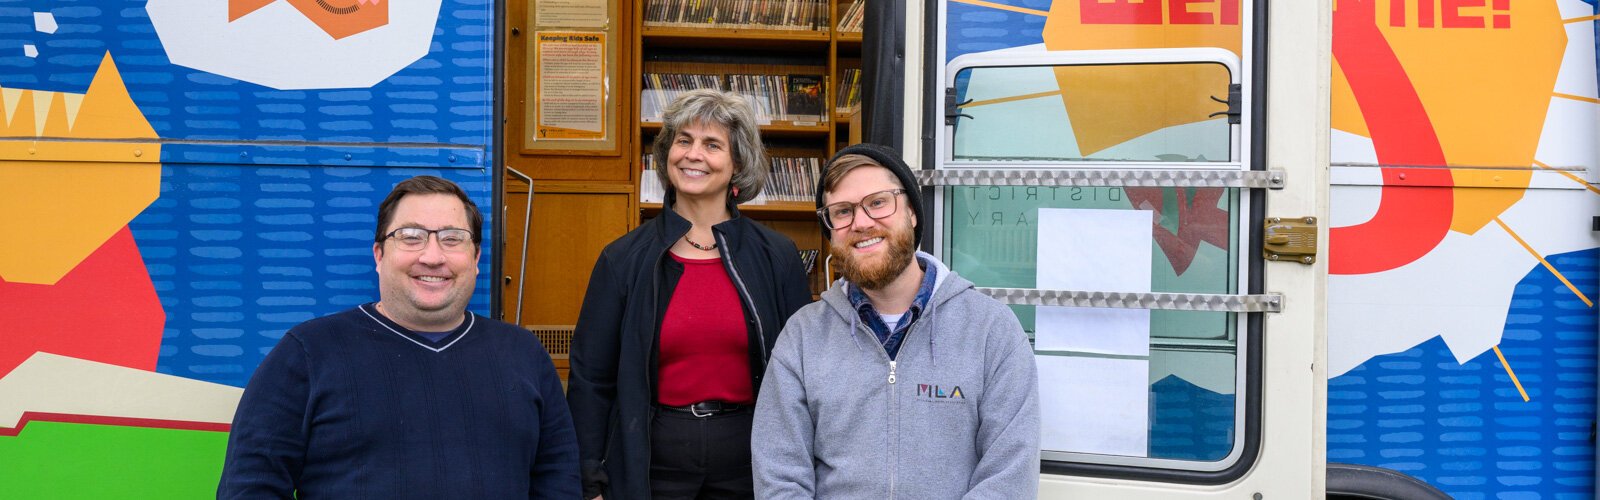 Sam Killian, Lisa Hoenig, and Aaron Smith at the bookmobile outside of the Ypsilanti District Library Michigan Avenue branch.